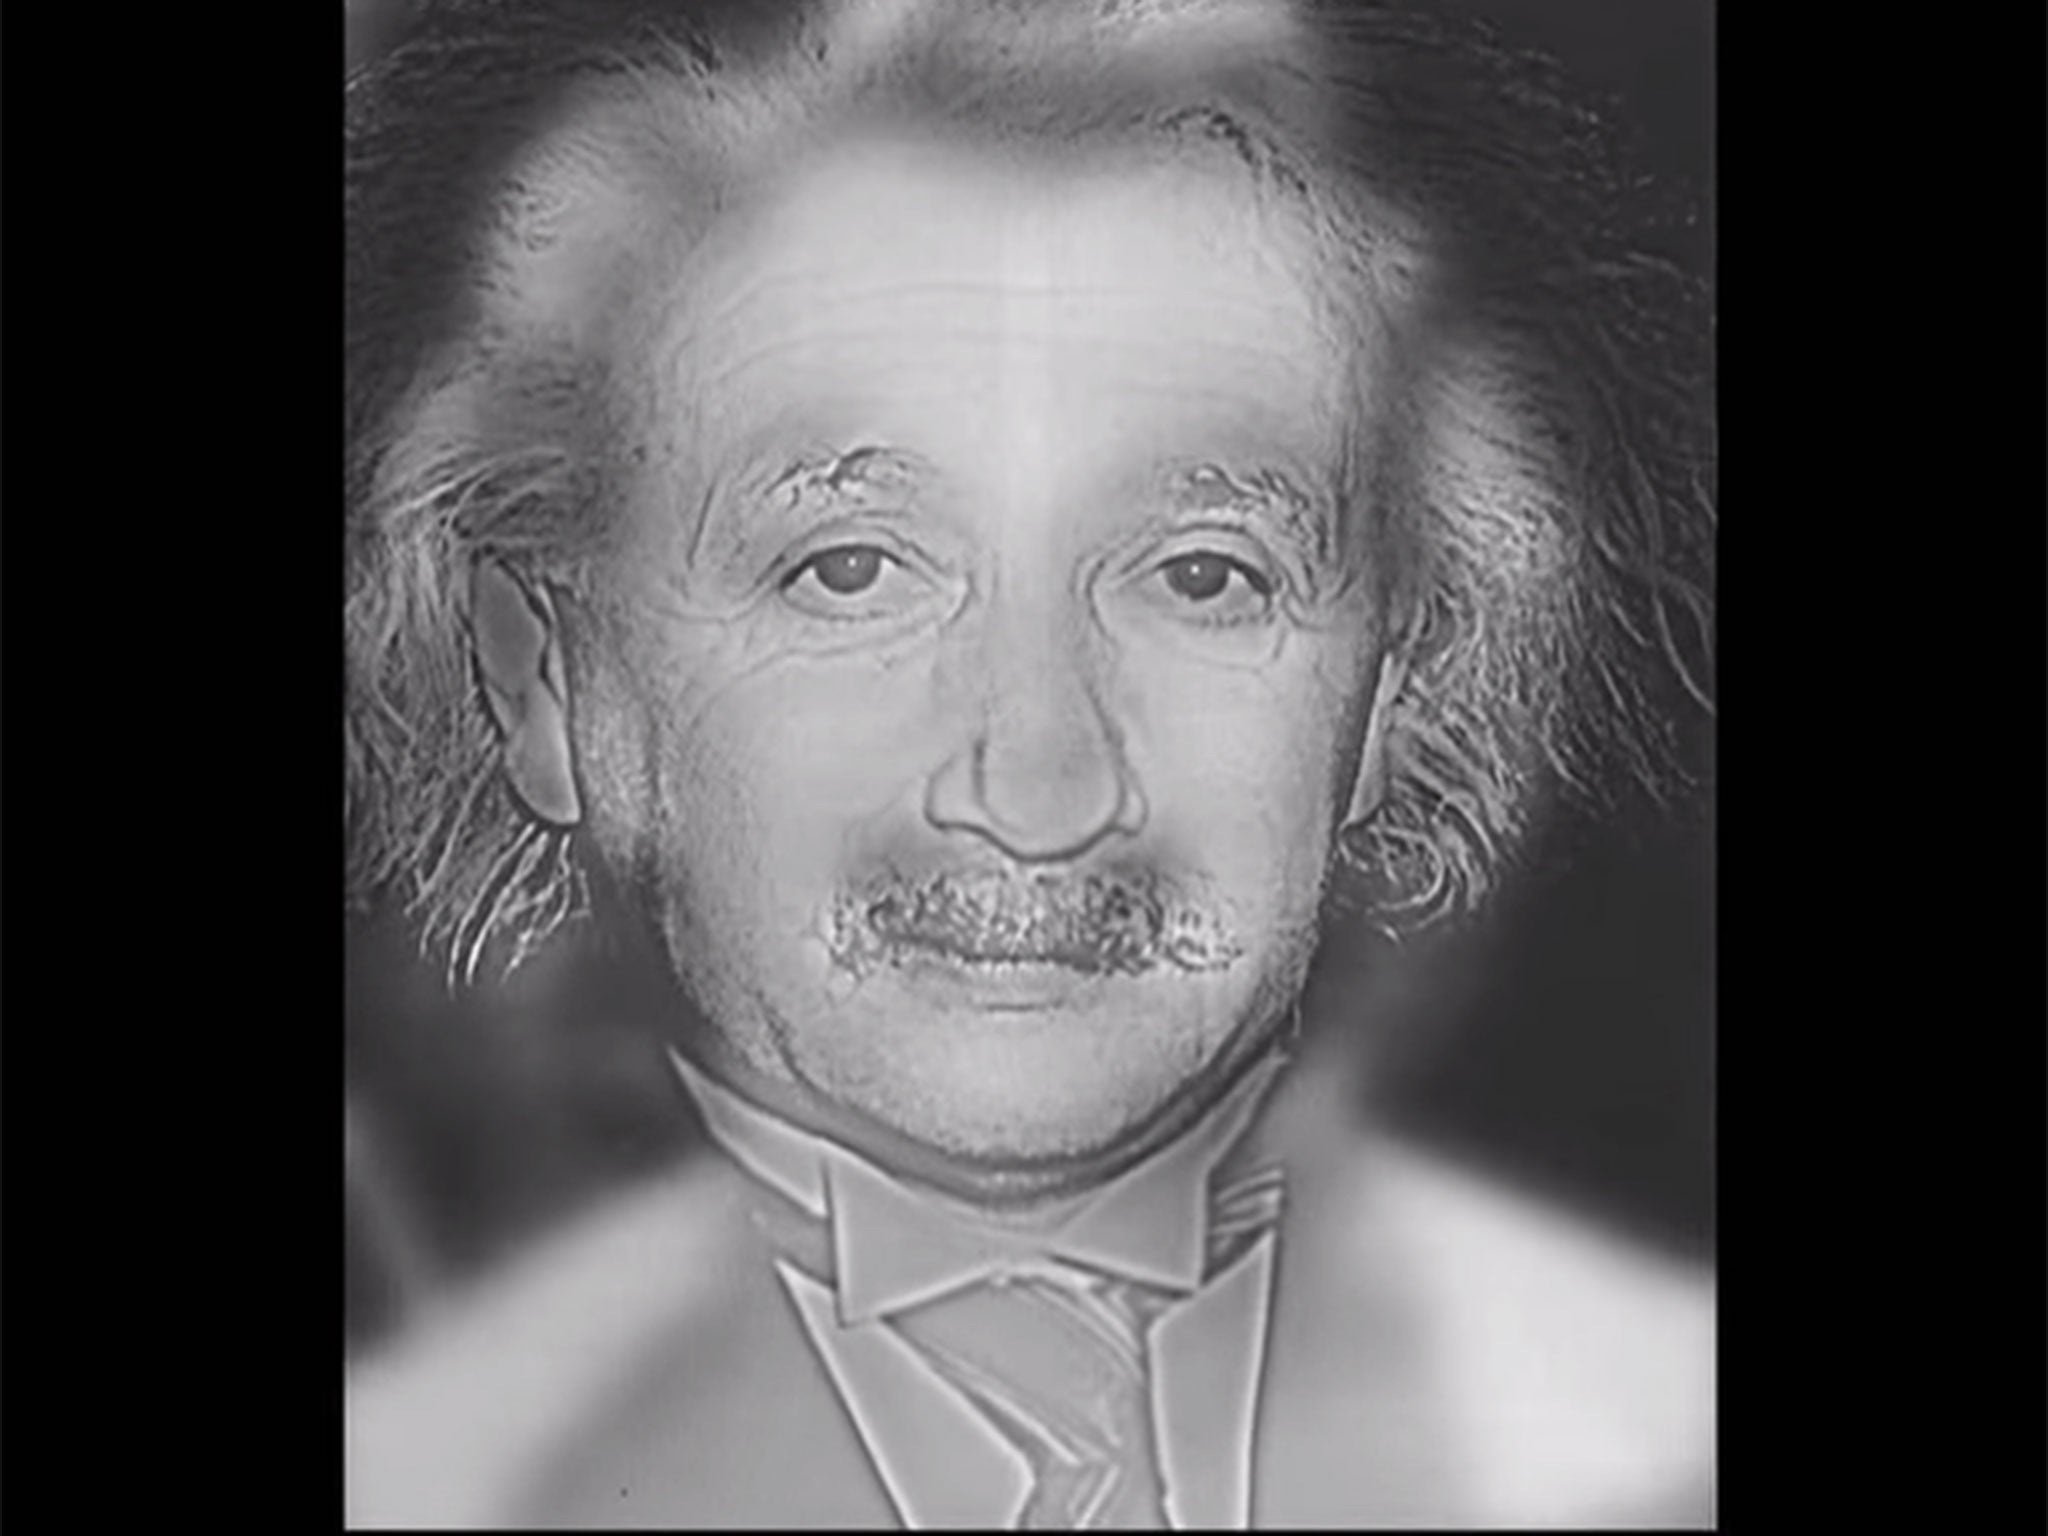 If you see Marilyn Monroe rather than Albert Einstein in this photo, you may need glasses.